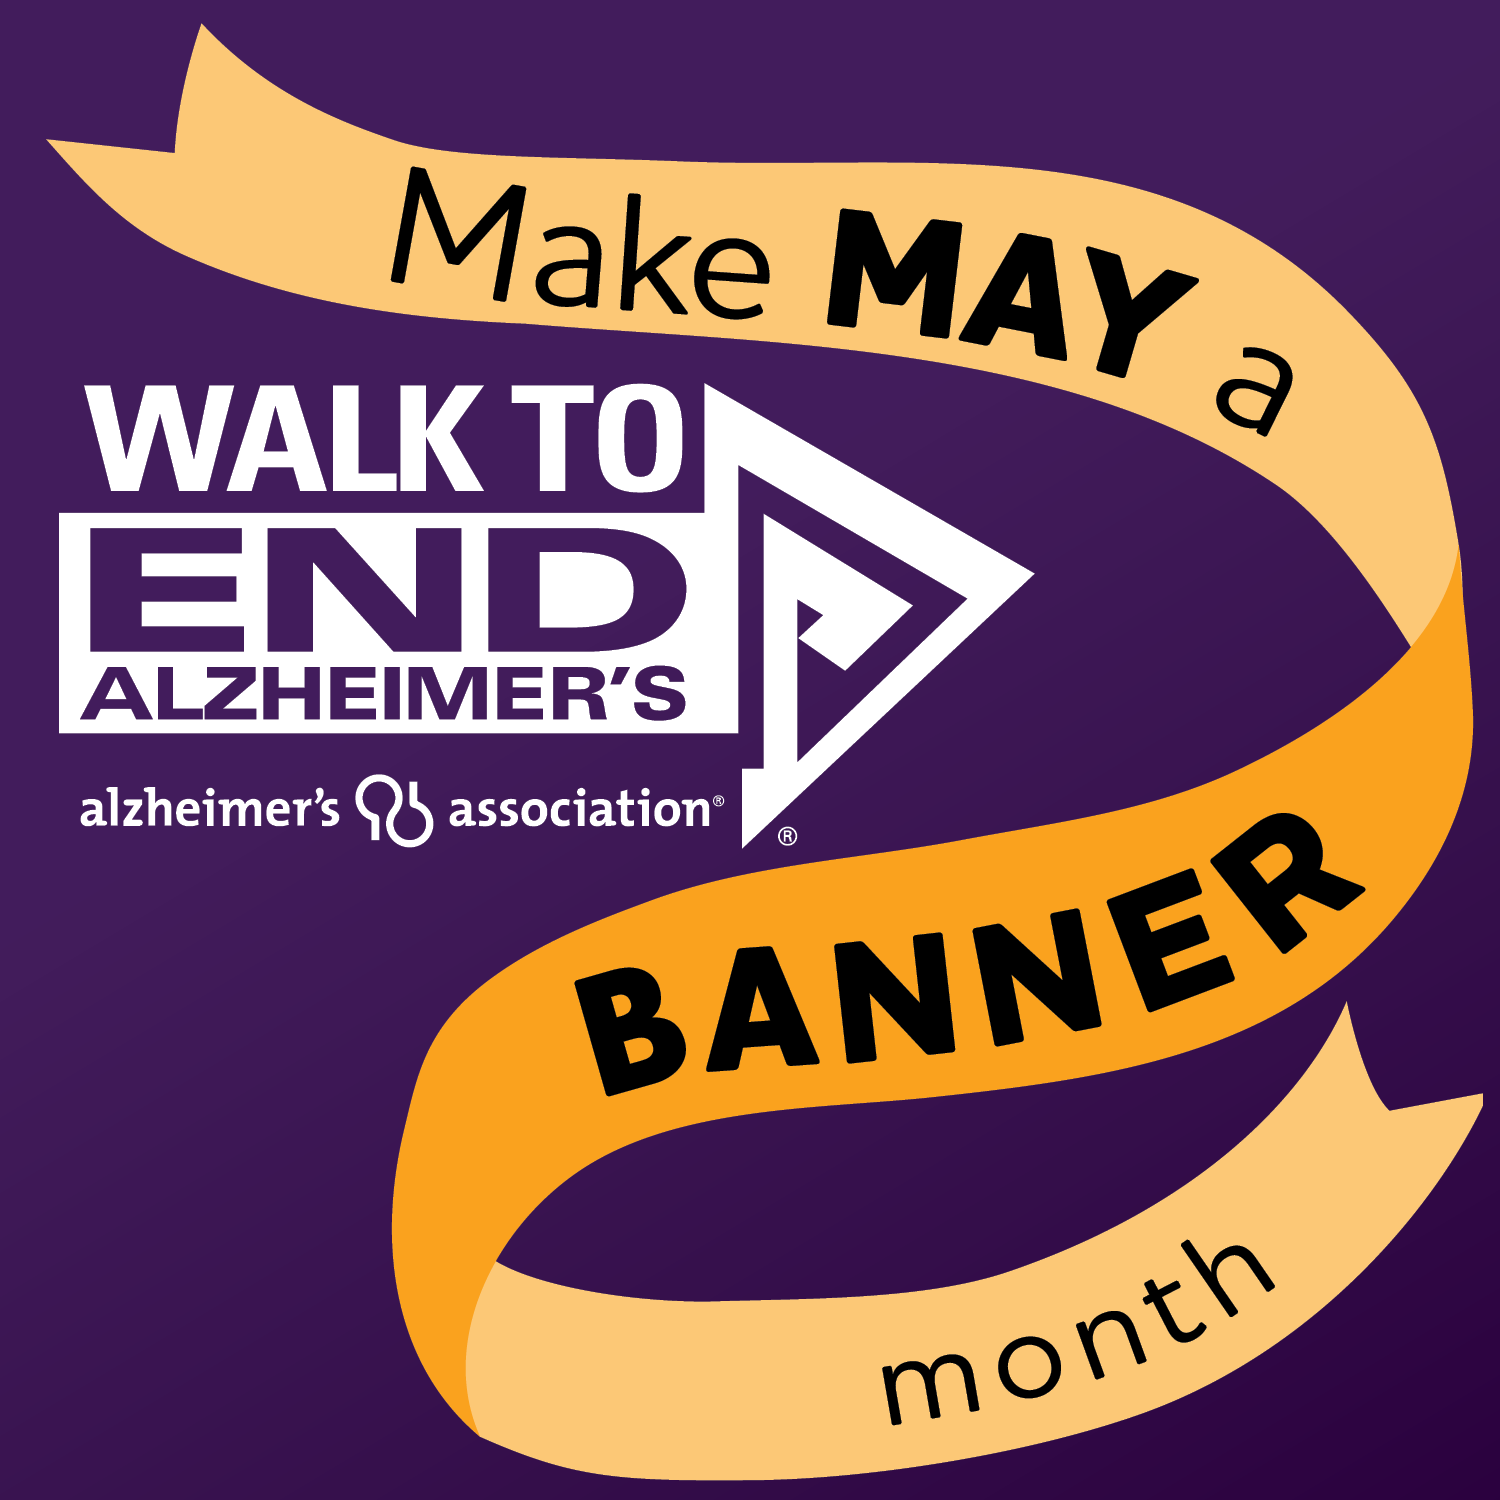 Make May a Banner Month